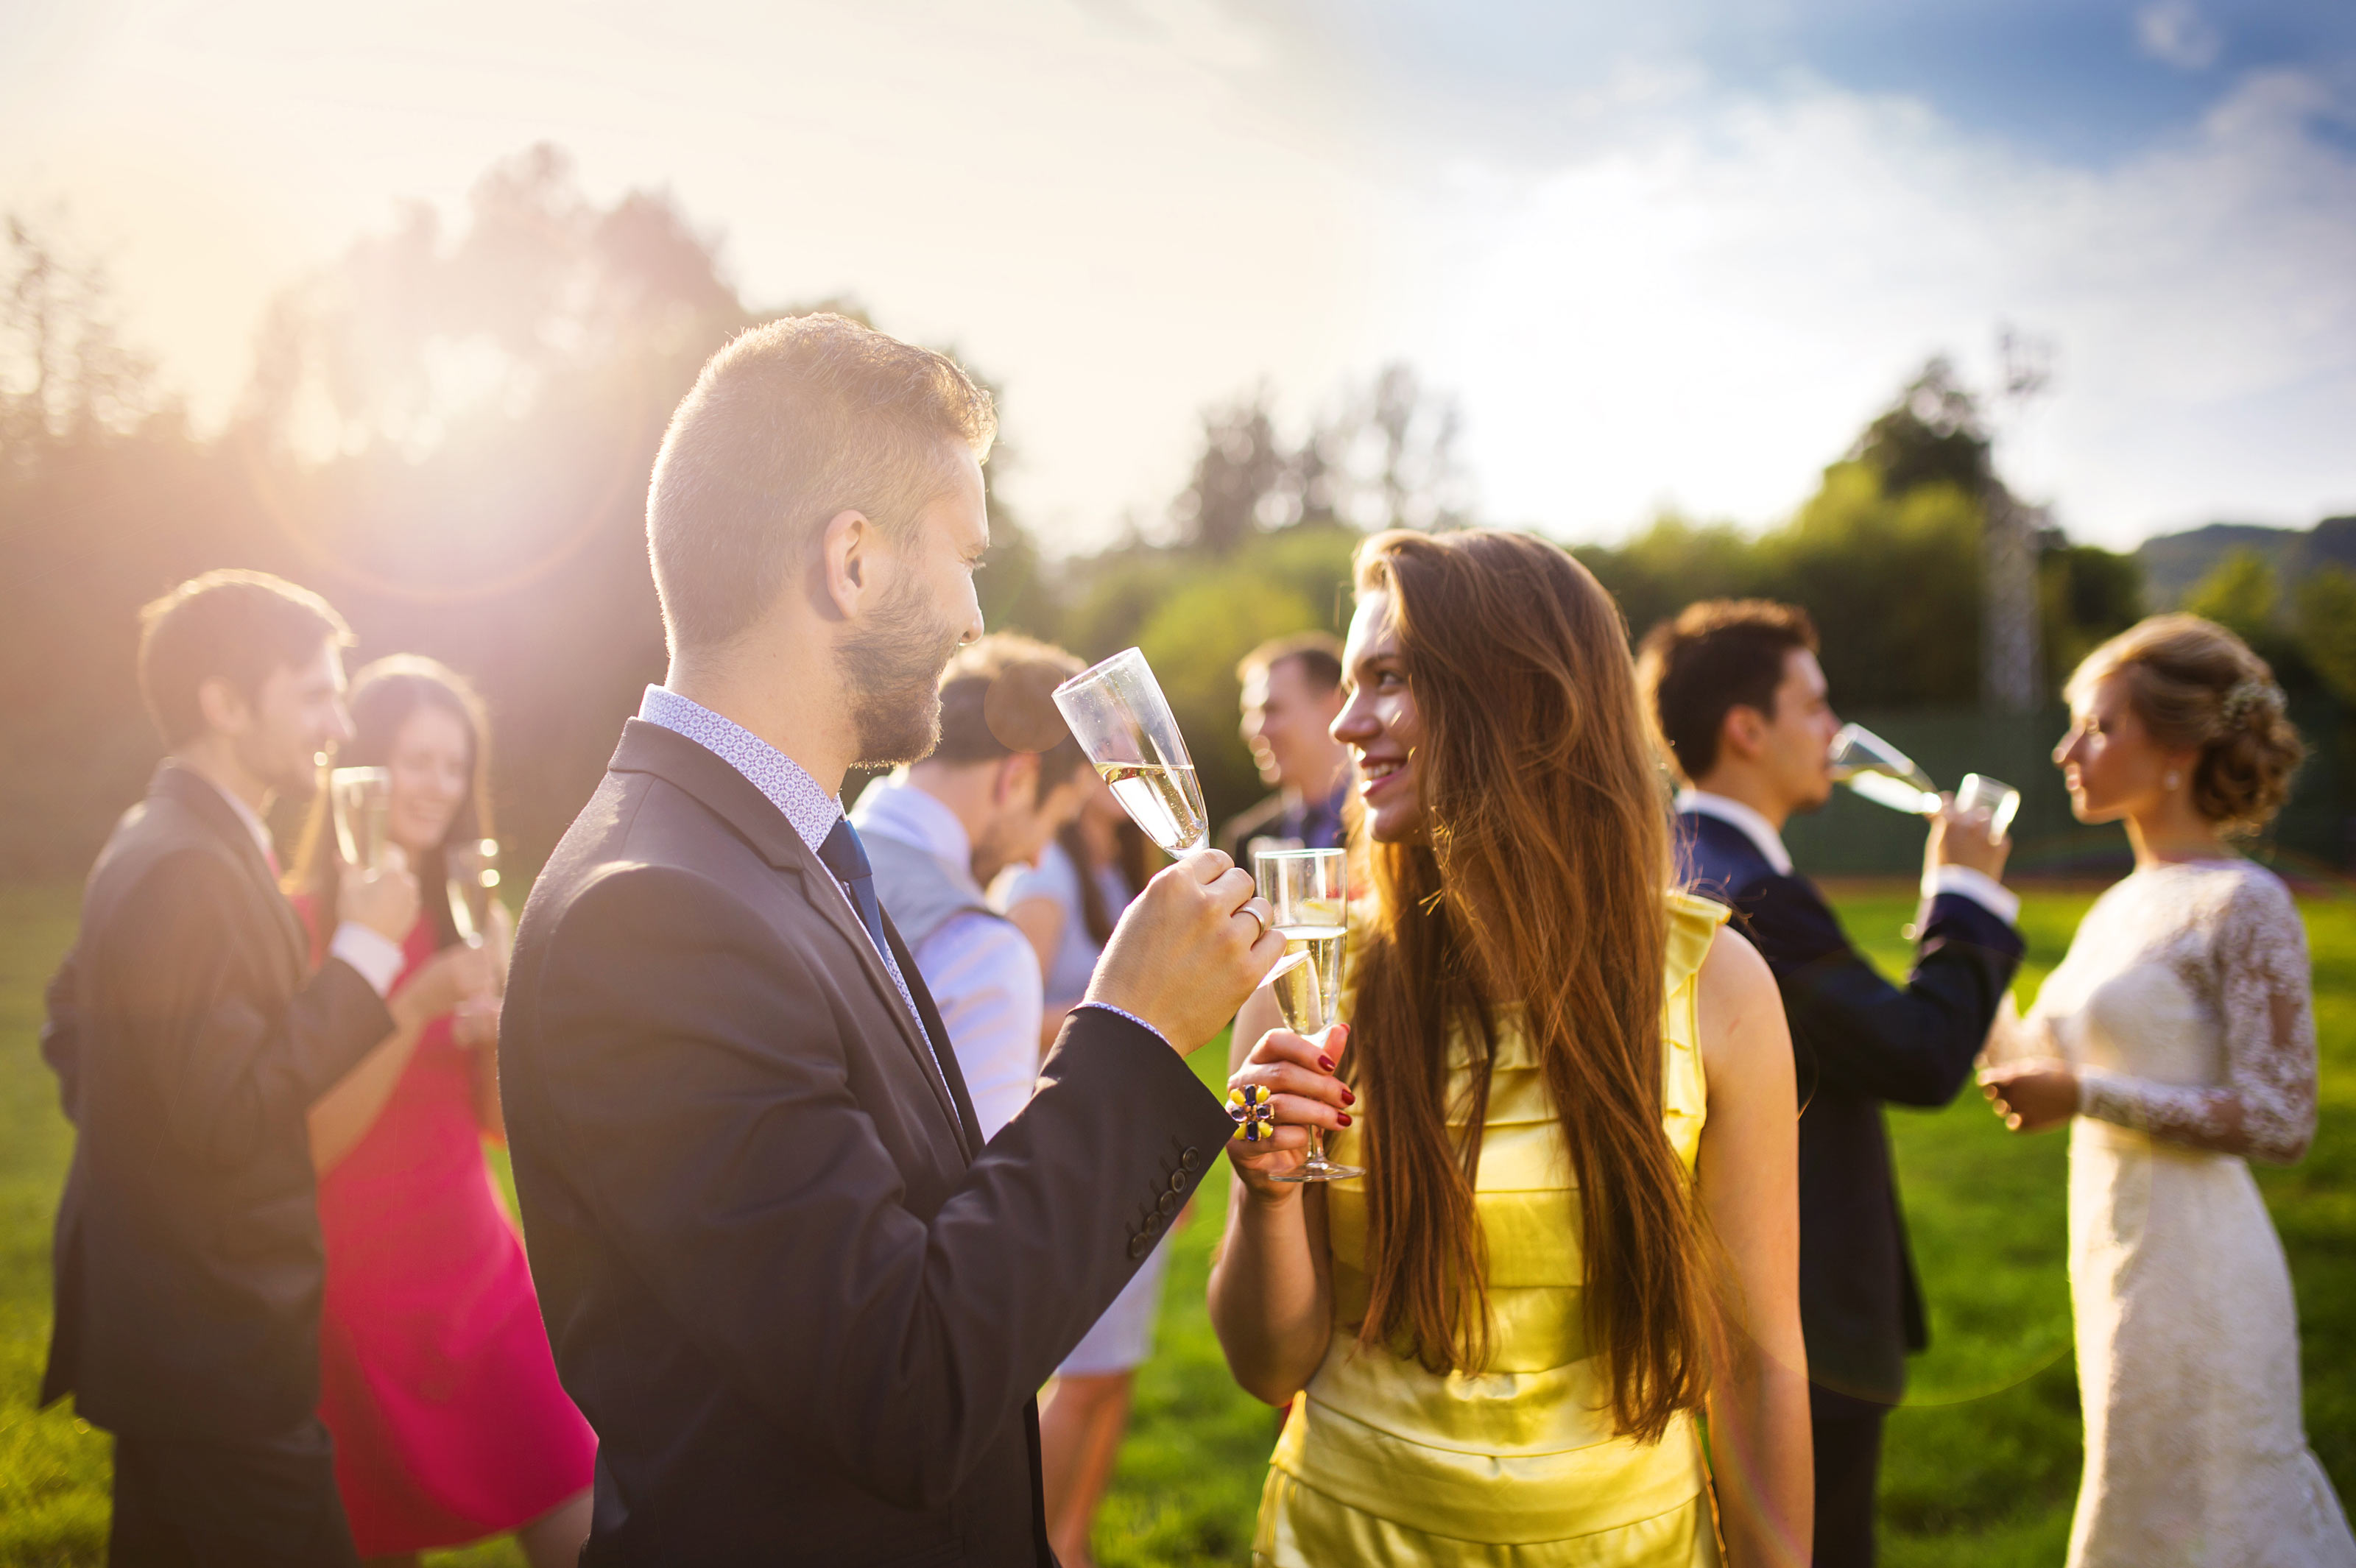 Wedding guests in a park © Halfpoint/Shutterstock.com